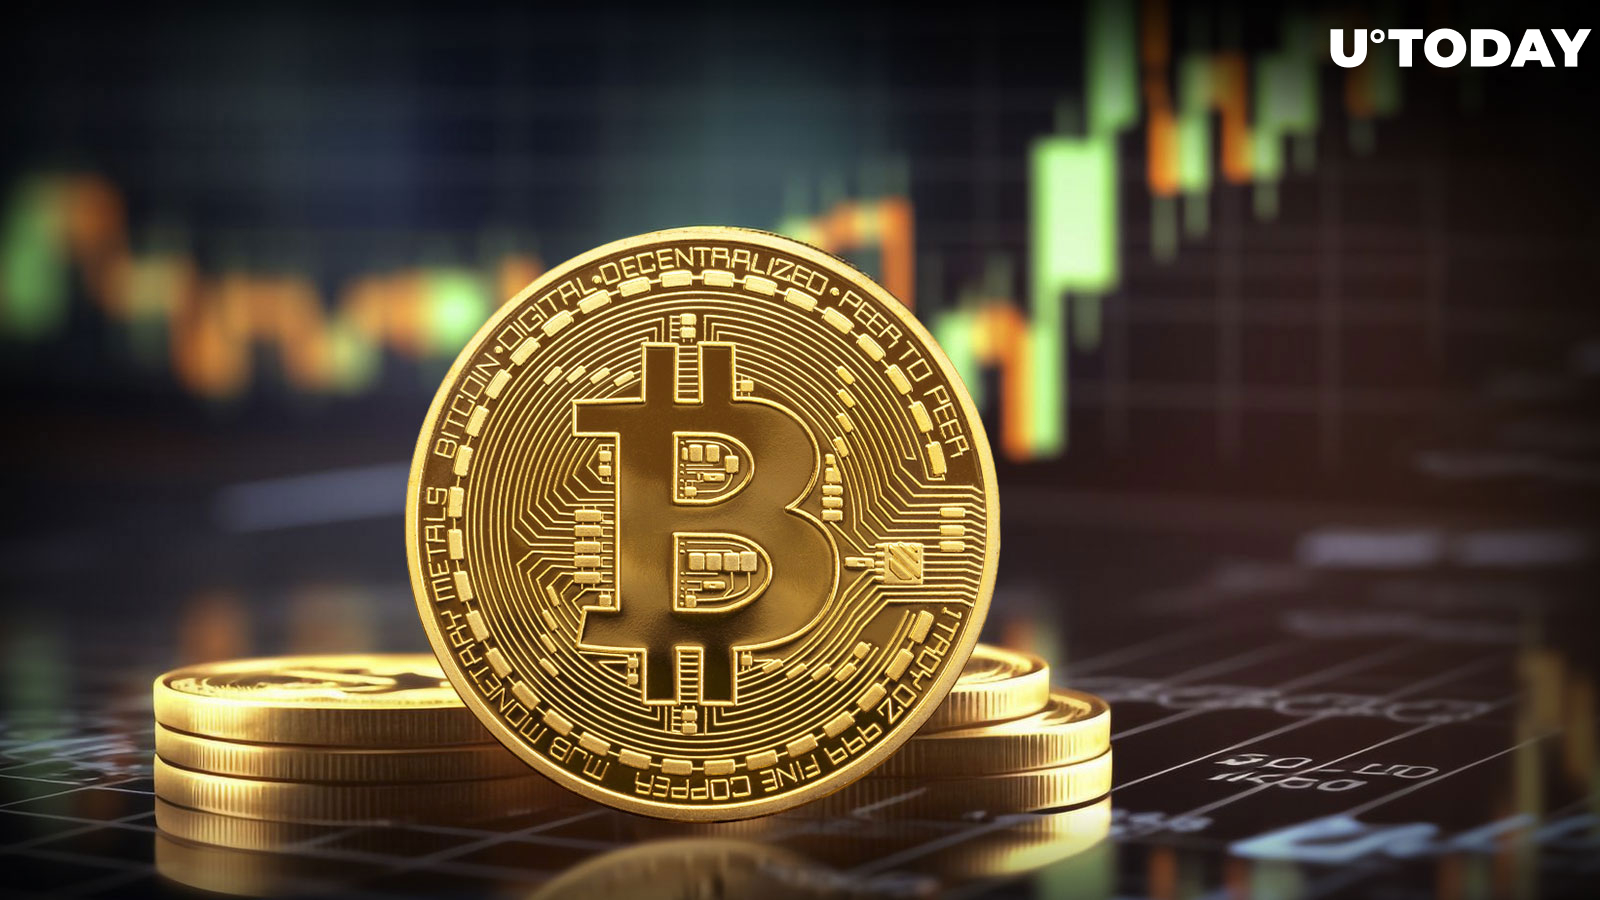 Bitcoin to Reach $100,000 Sooner Than Expected, Predicts Analyst